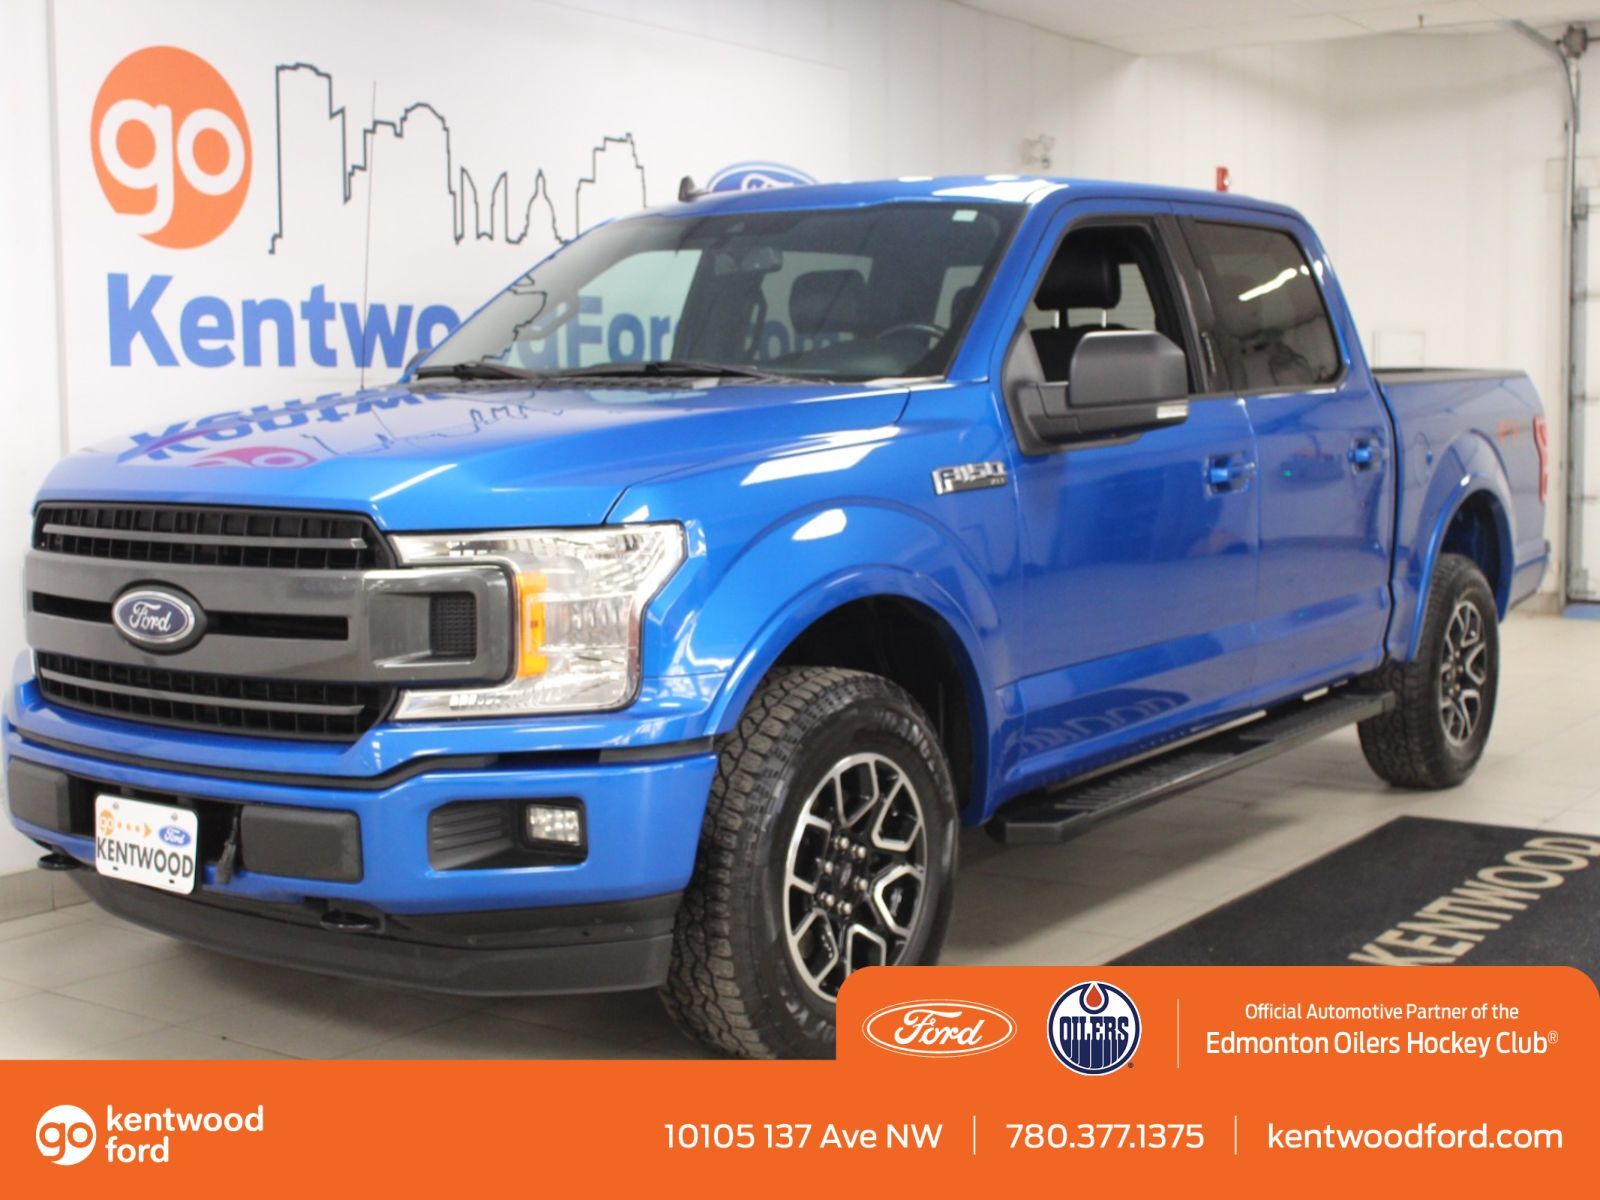 2020 Ford F-150 XLT | 302A | 4x4 | Trailer Tow | 18s | Sport | FX4